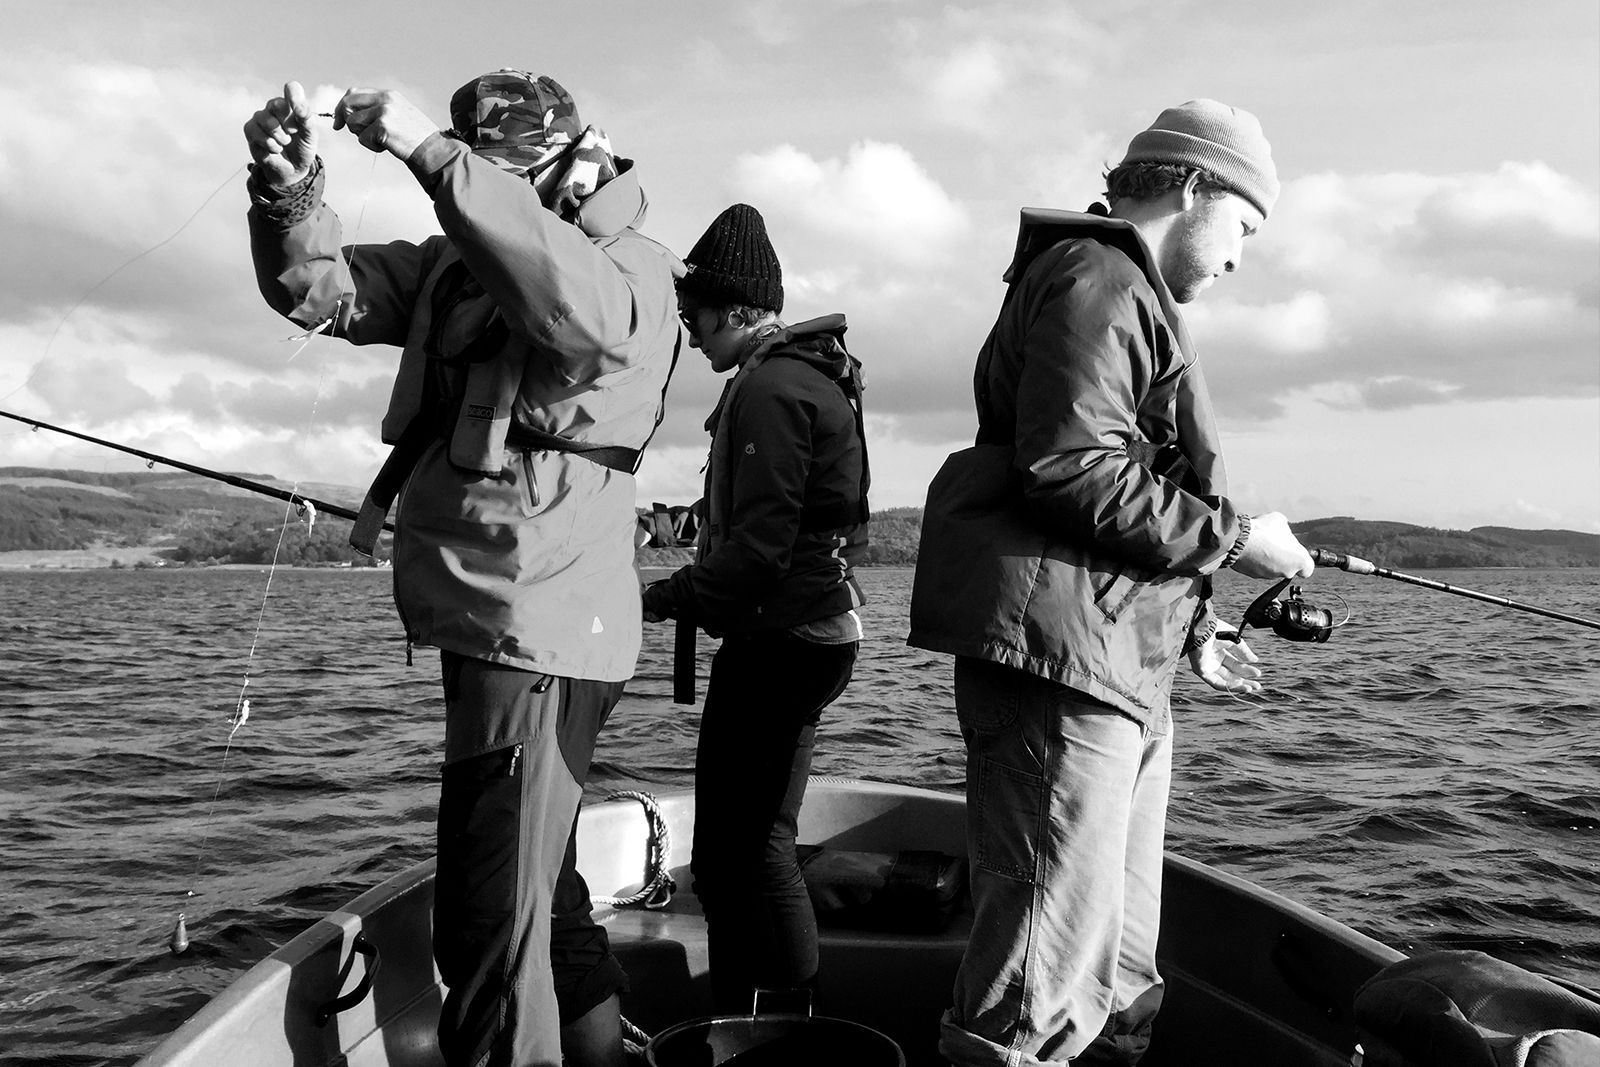 O Street's annual fishing trip 2019, Directors Neil Wallace and Tessa Simpson and Design Jonny Mowat fishing from a boat on Loch Fyne.